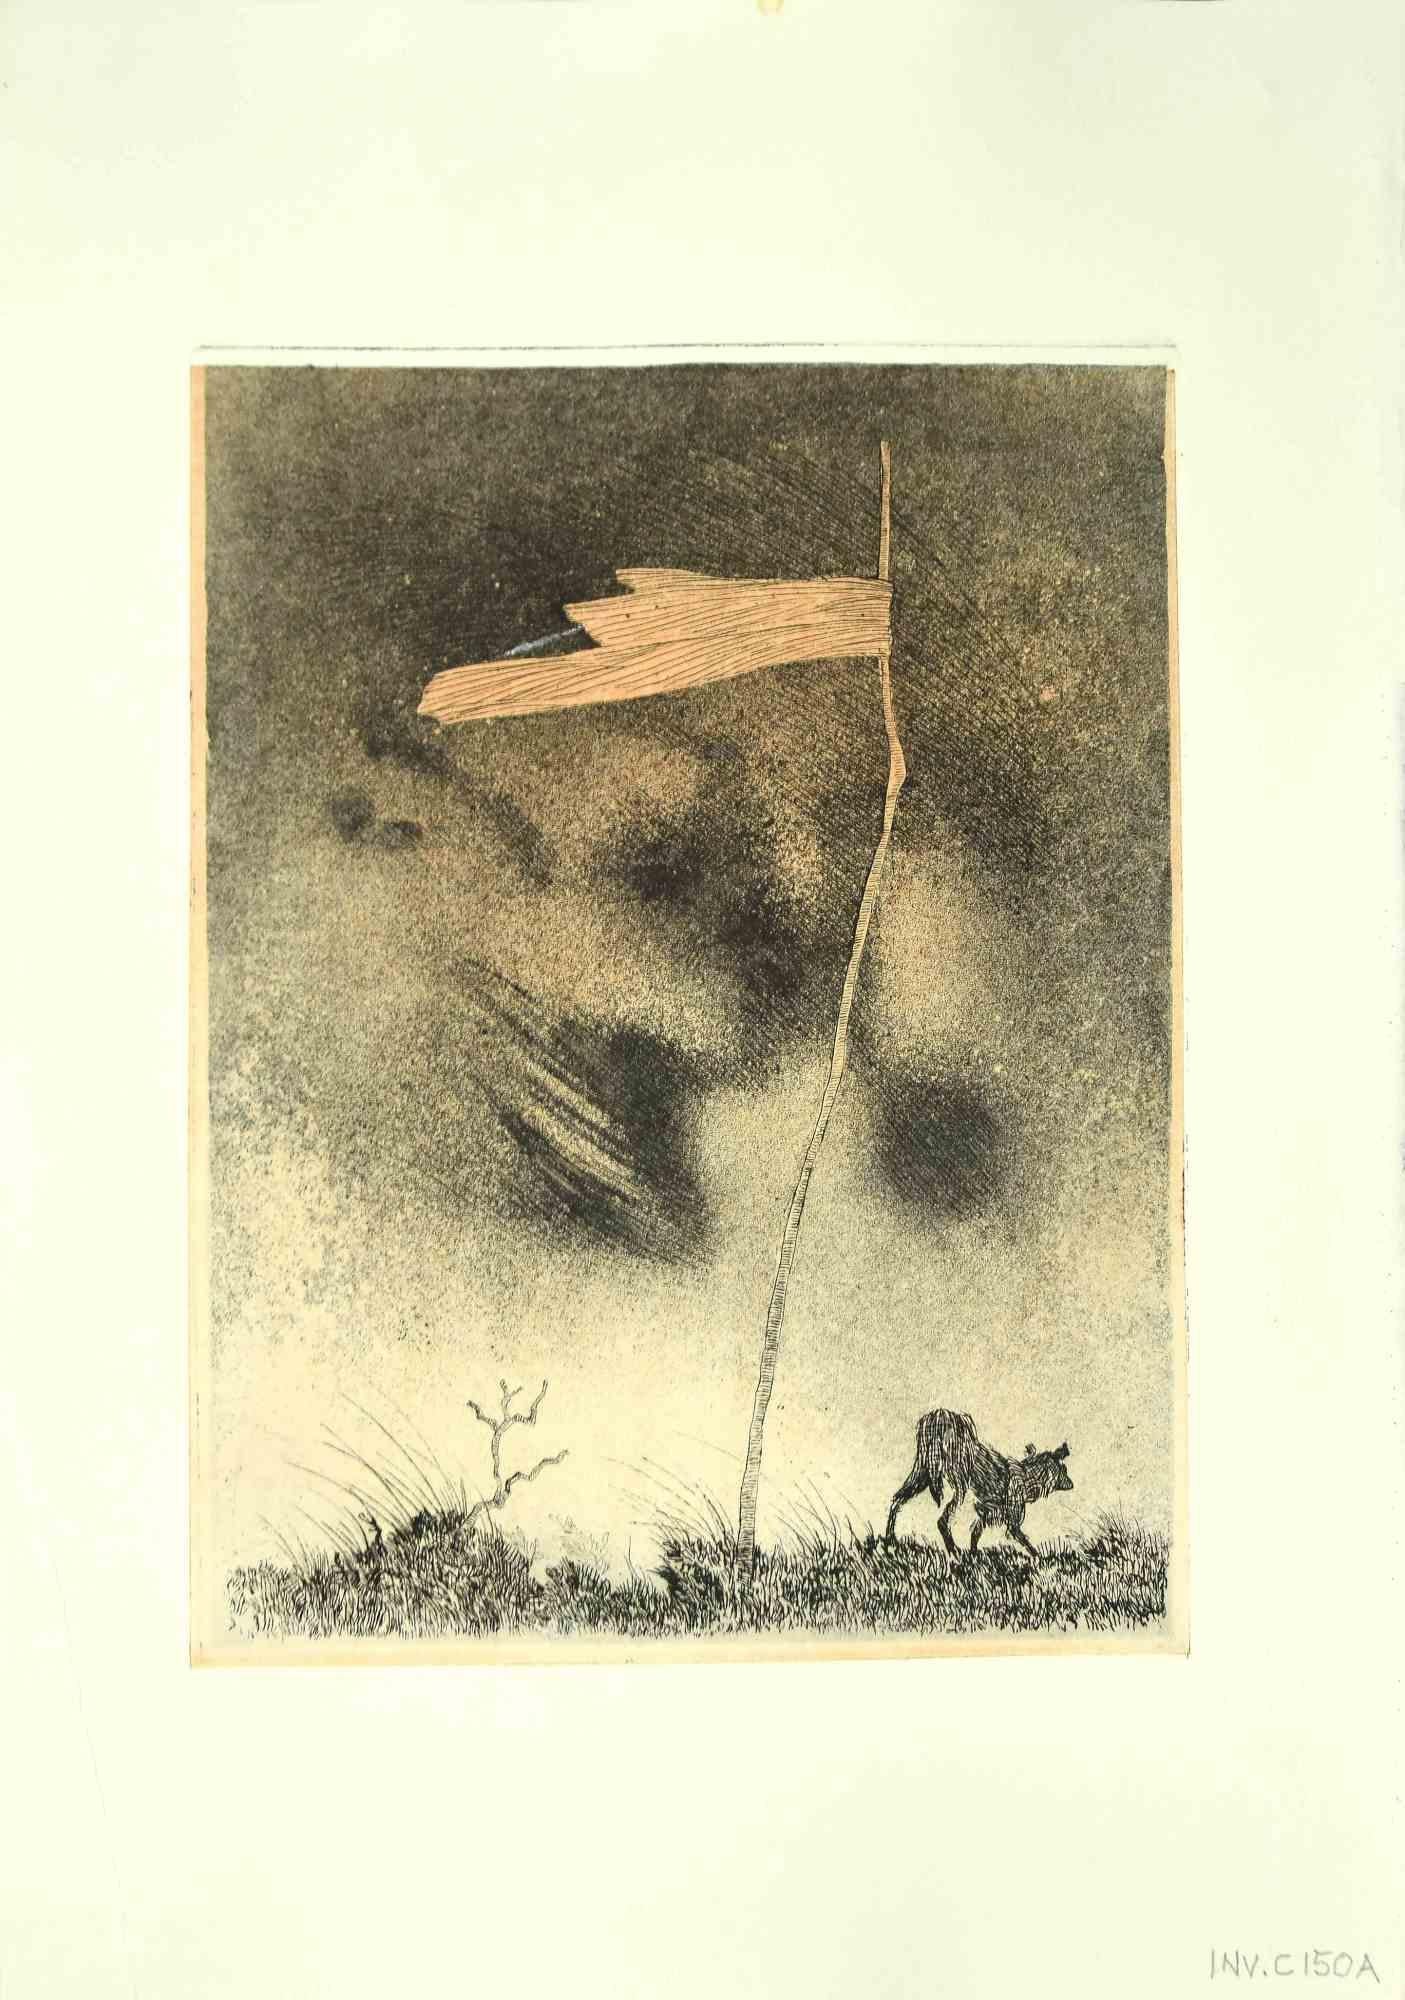 The Flag is an original etching realized by Leo Guida in the 1970s.

Good condition.

The artwork is depicted through strong strokes with perfect hatchings.

Not signed and not dated.